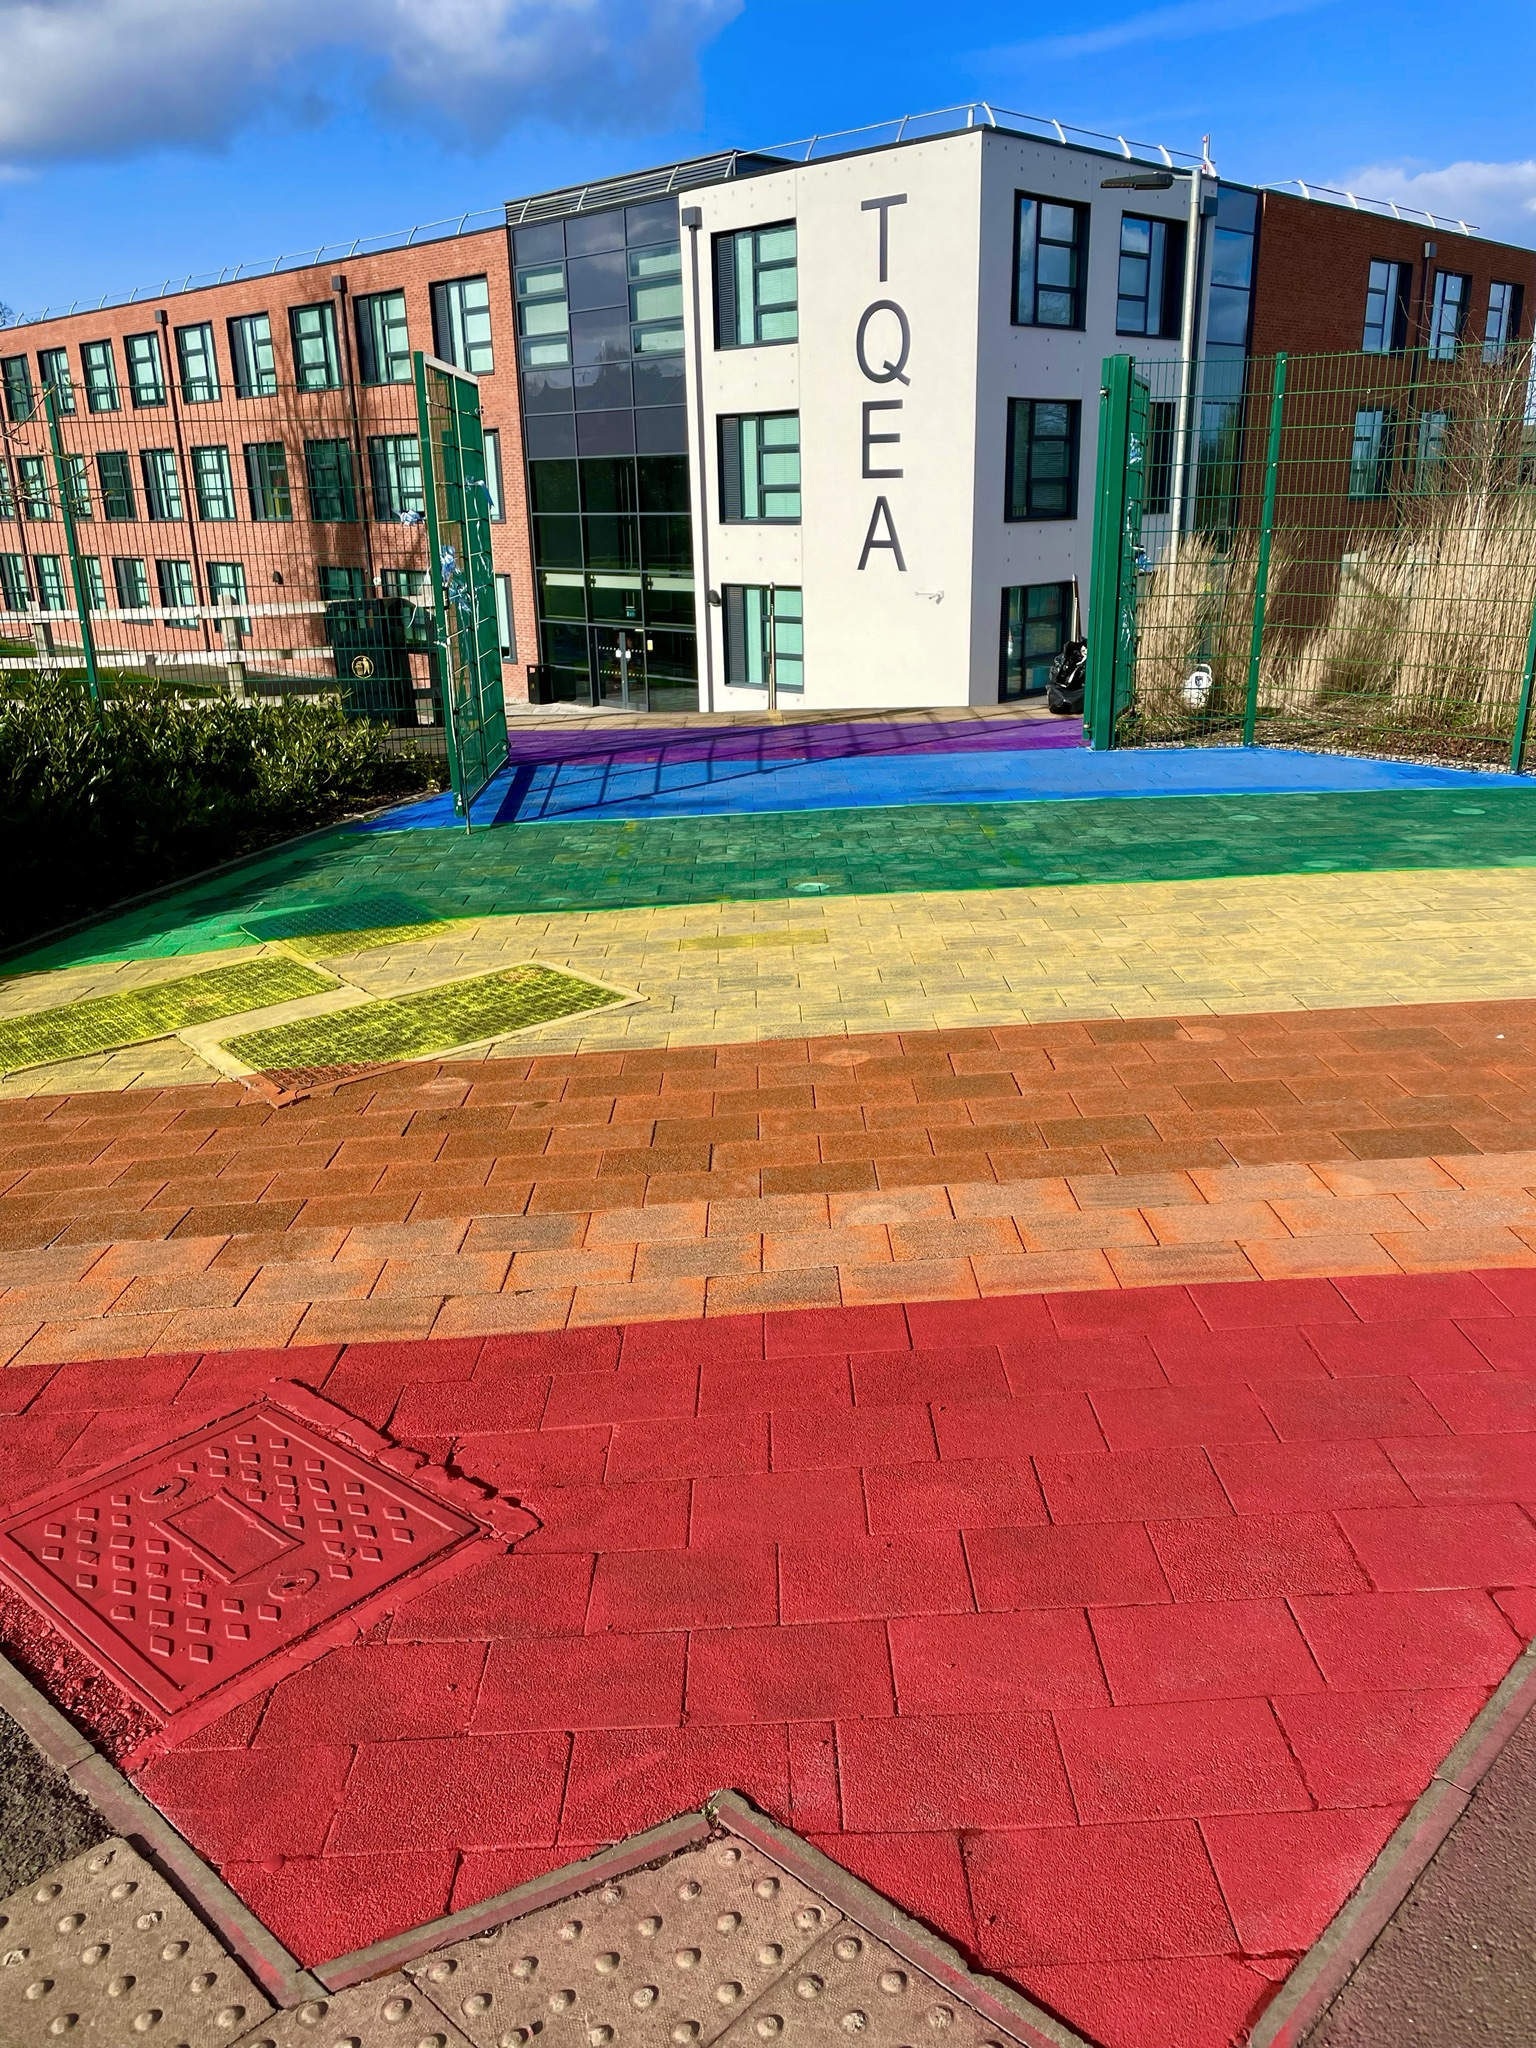 Picture of the front entrance of The Queen Elizabeth Academy in Atherstone. The front of the school has a large rainbow paint